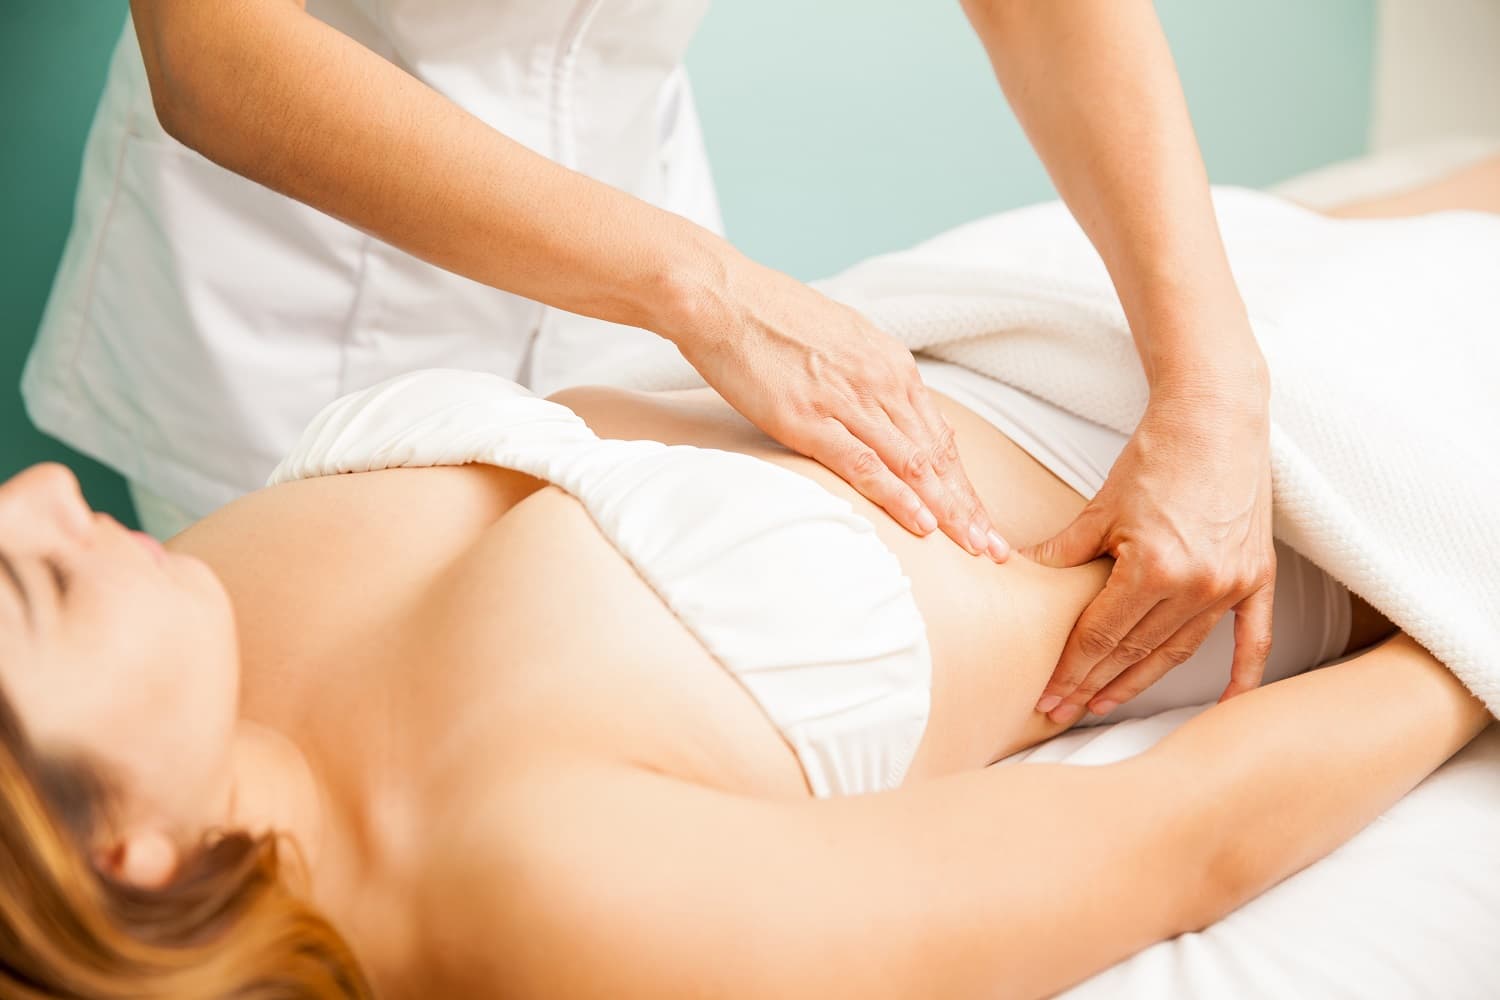 What is lymphatic drainage?